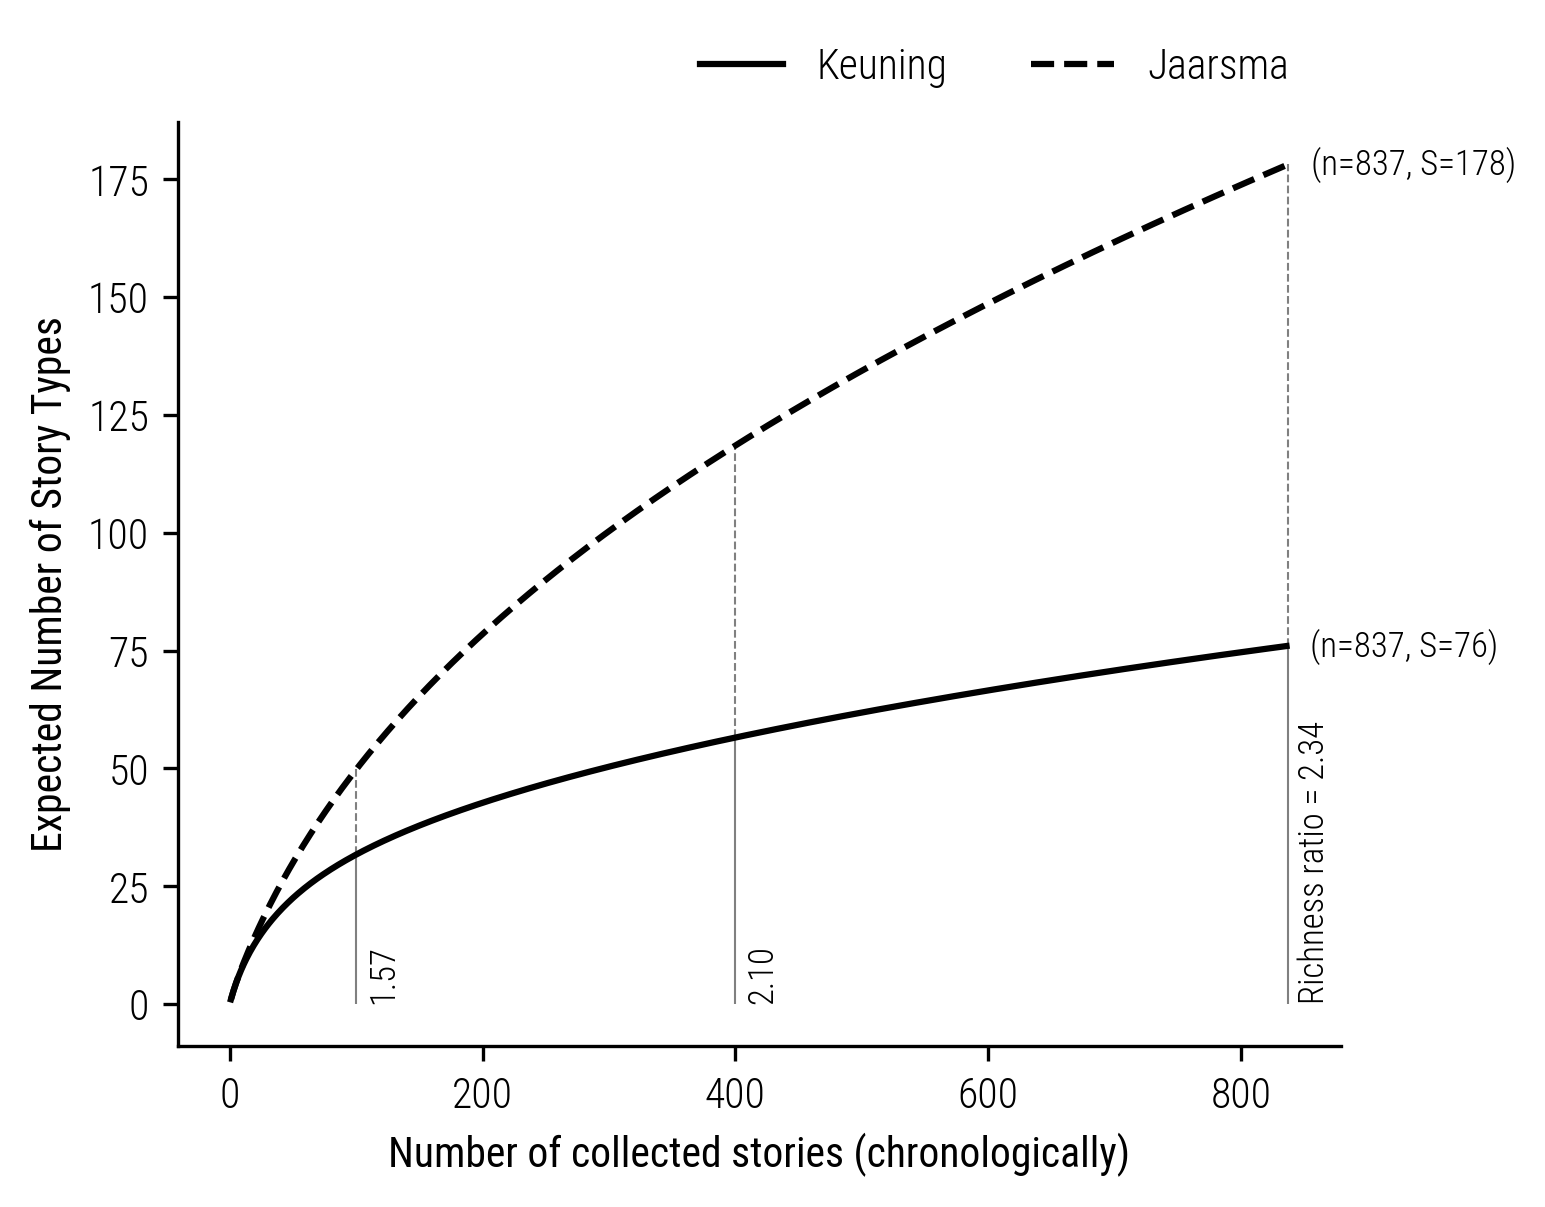 Figure 4: Comparison of Rarefaction curves of the collectors Jaarsma and Keuning.